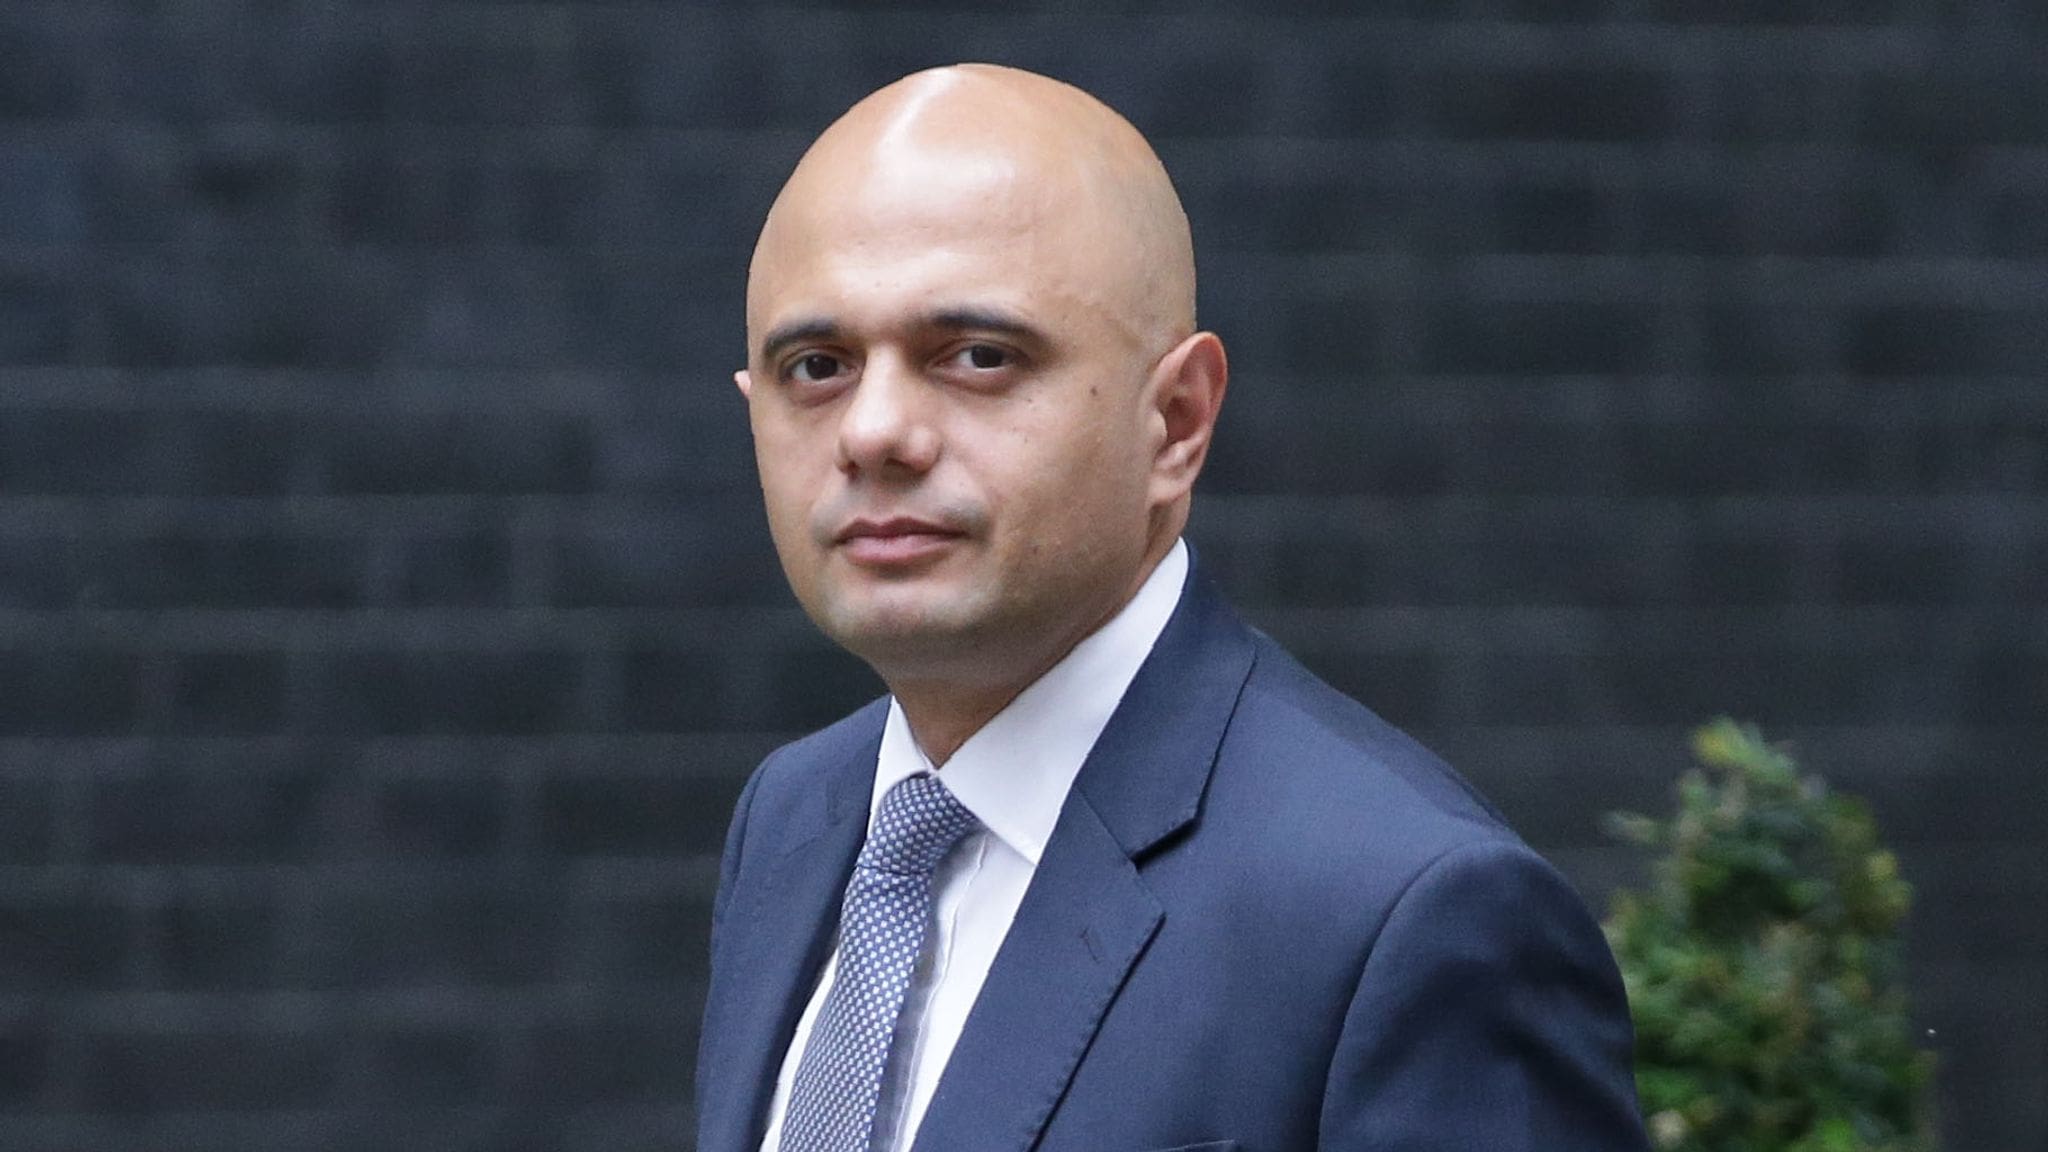 sajid-javid-urges-the-elderly-and-vulnerable-to-get-booster-jabs-to-avoid-a-winter-lockdown